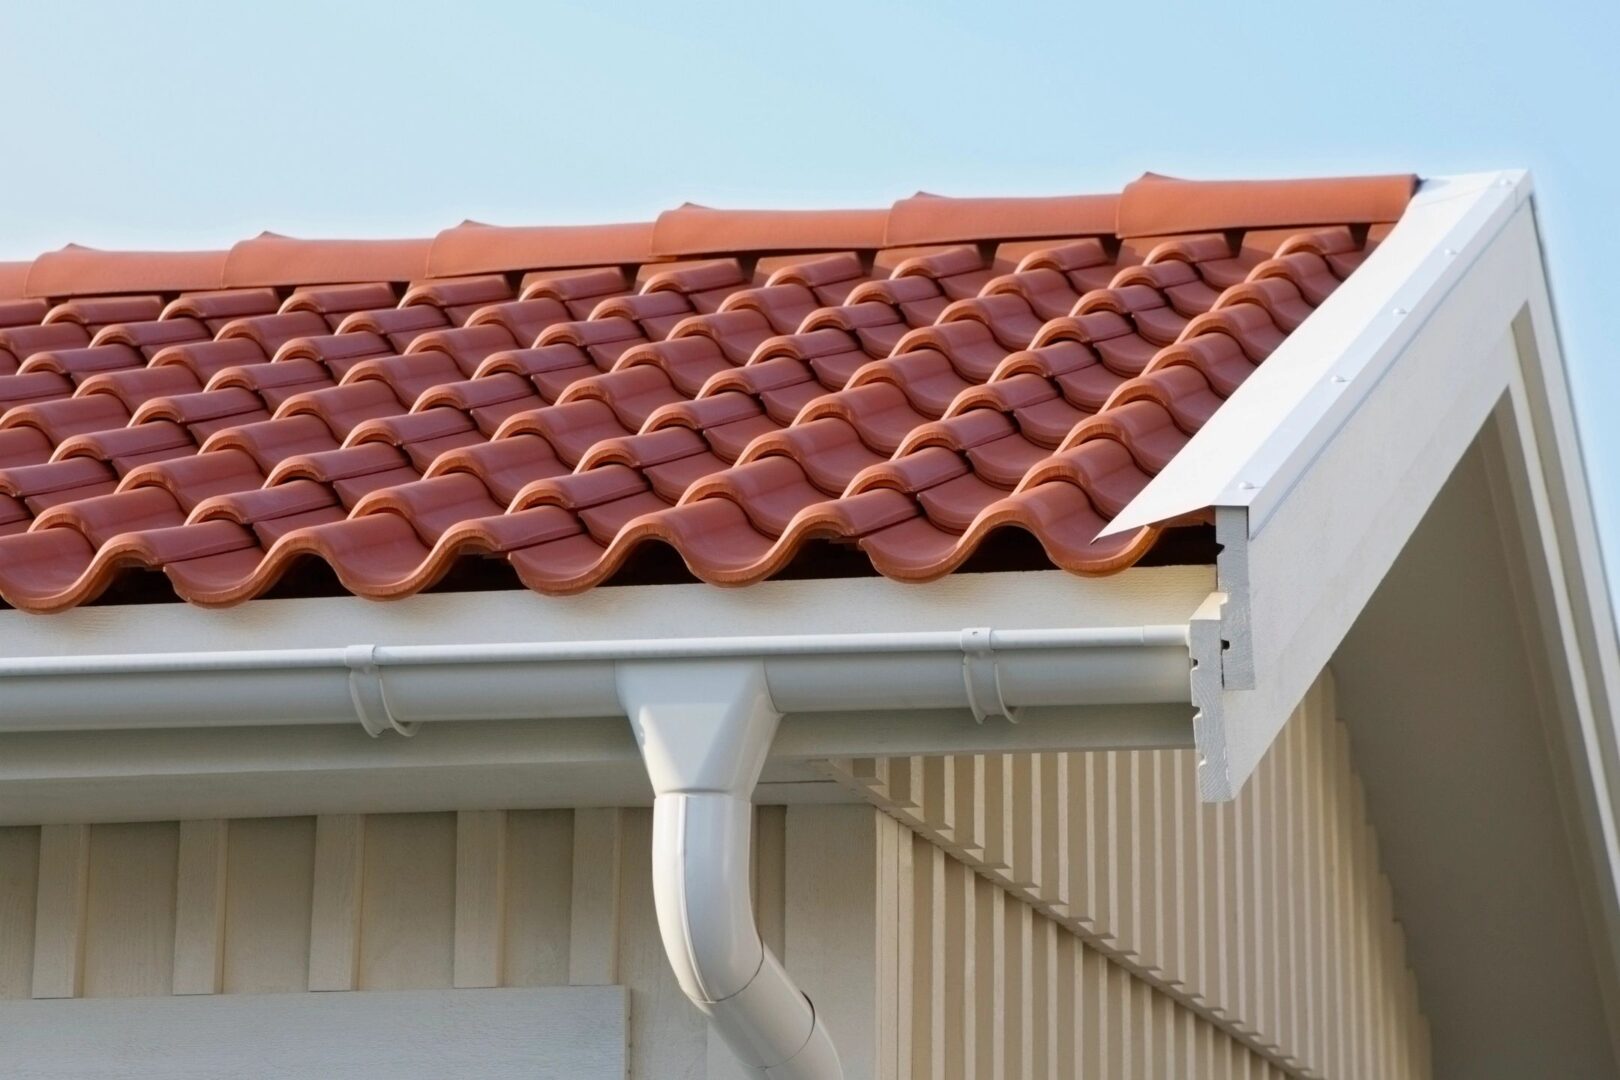 A red tile roof with gutter and rain gutters.